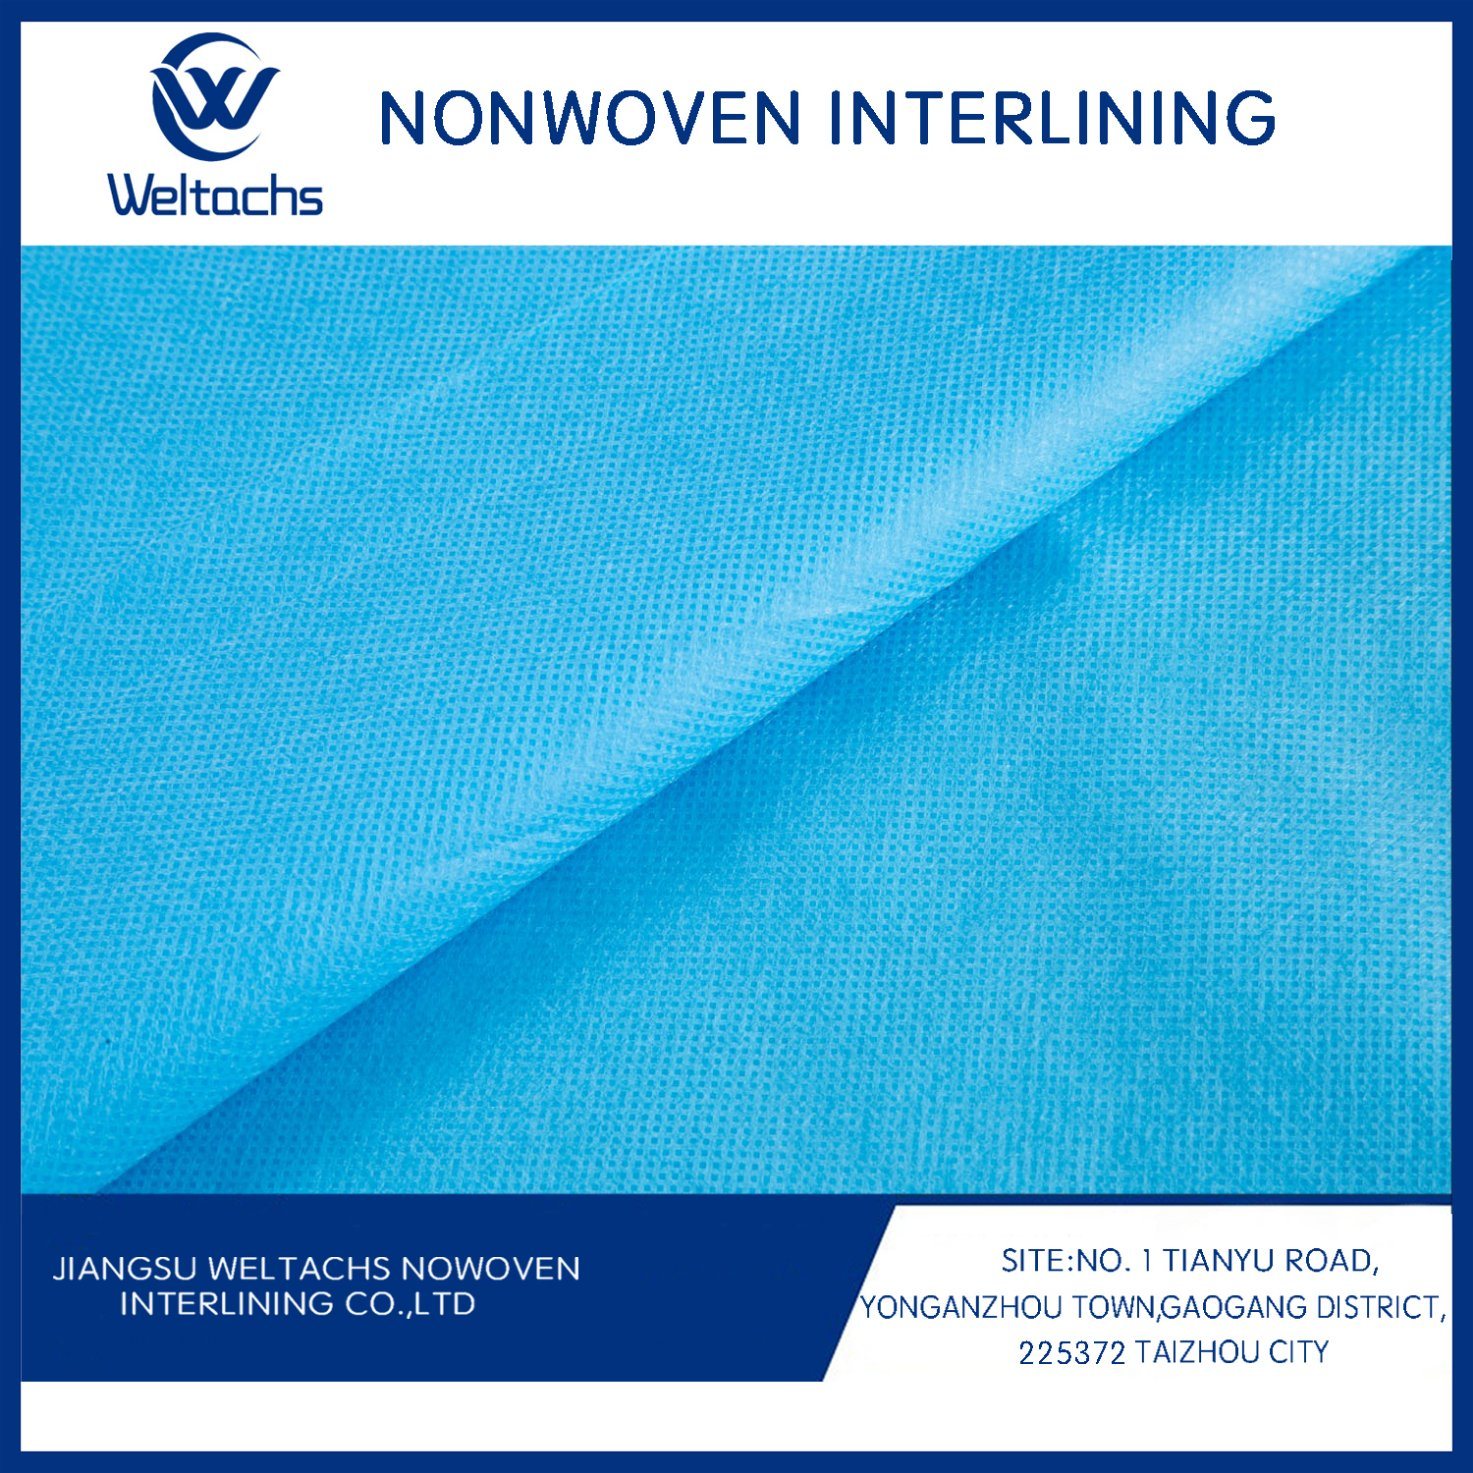 Factory Chemical Bond Gum Stay Fusing Interfacing Nonwoven Interlining 100% Polyester Textile Fabric